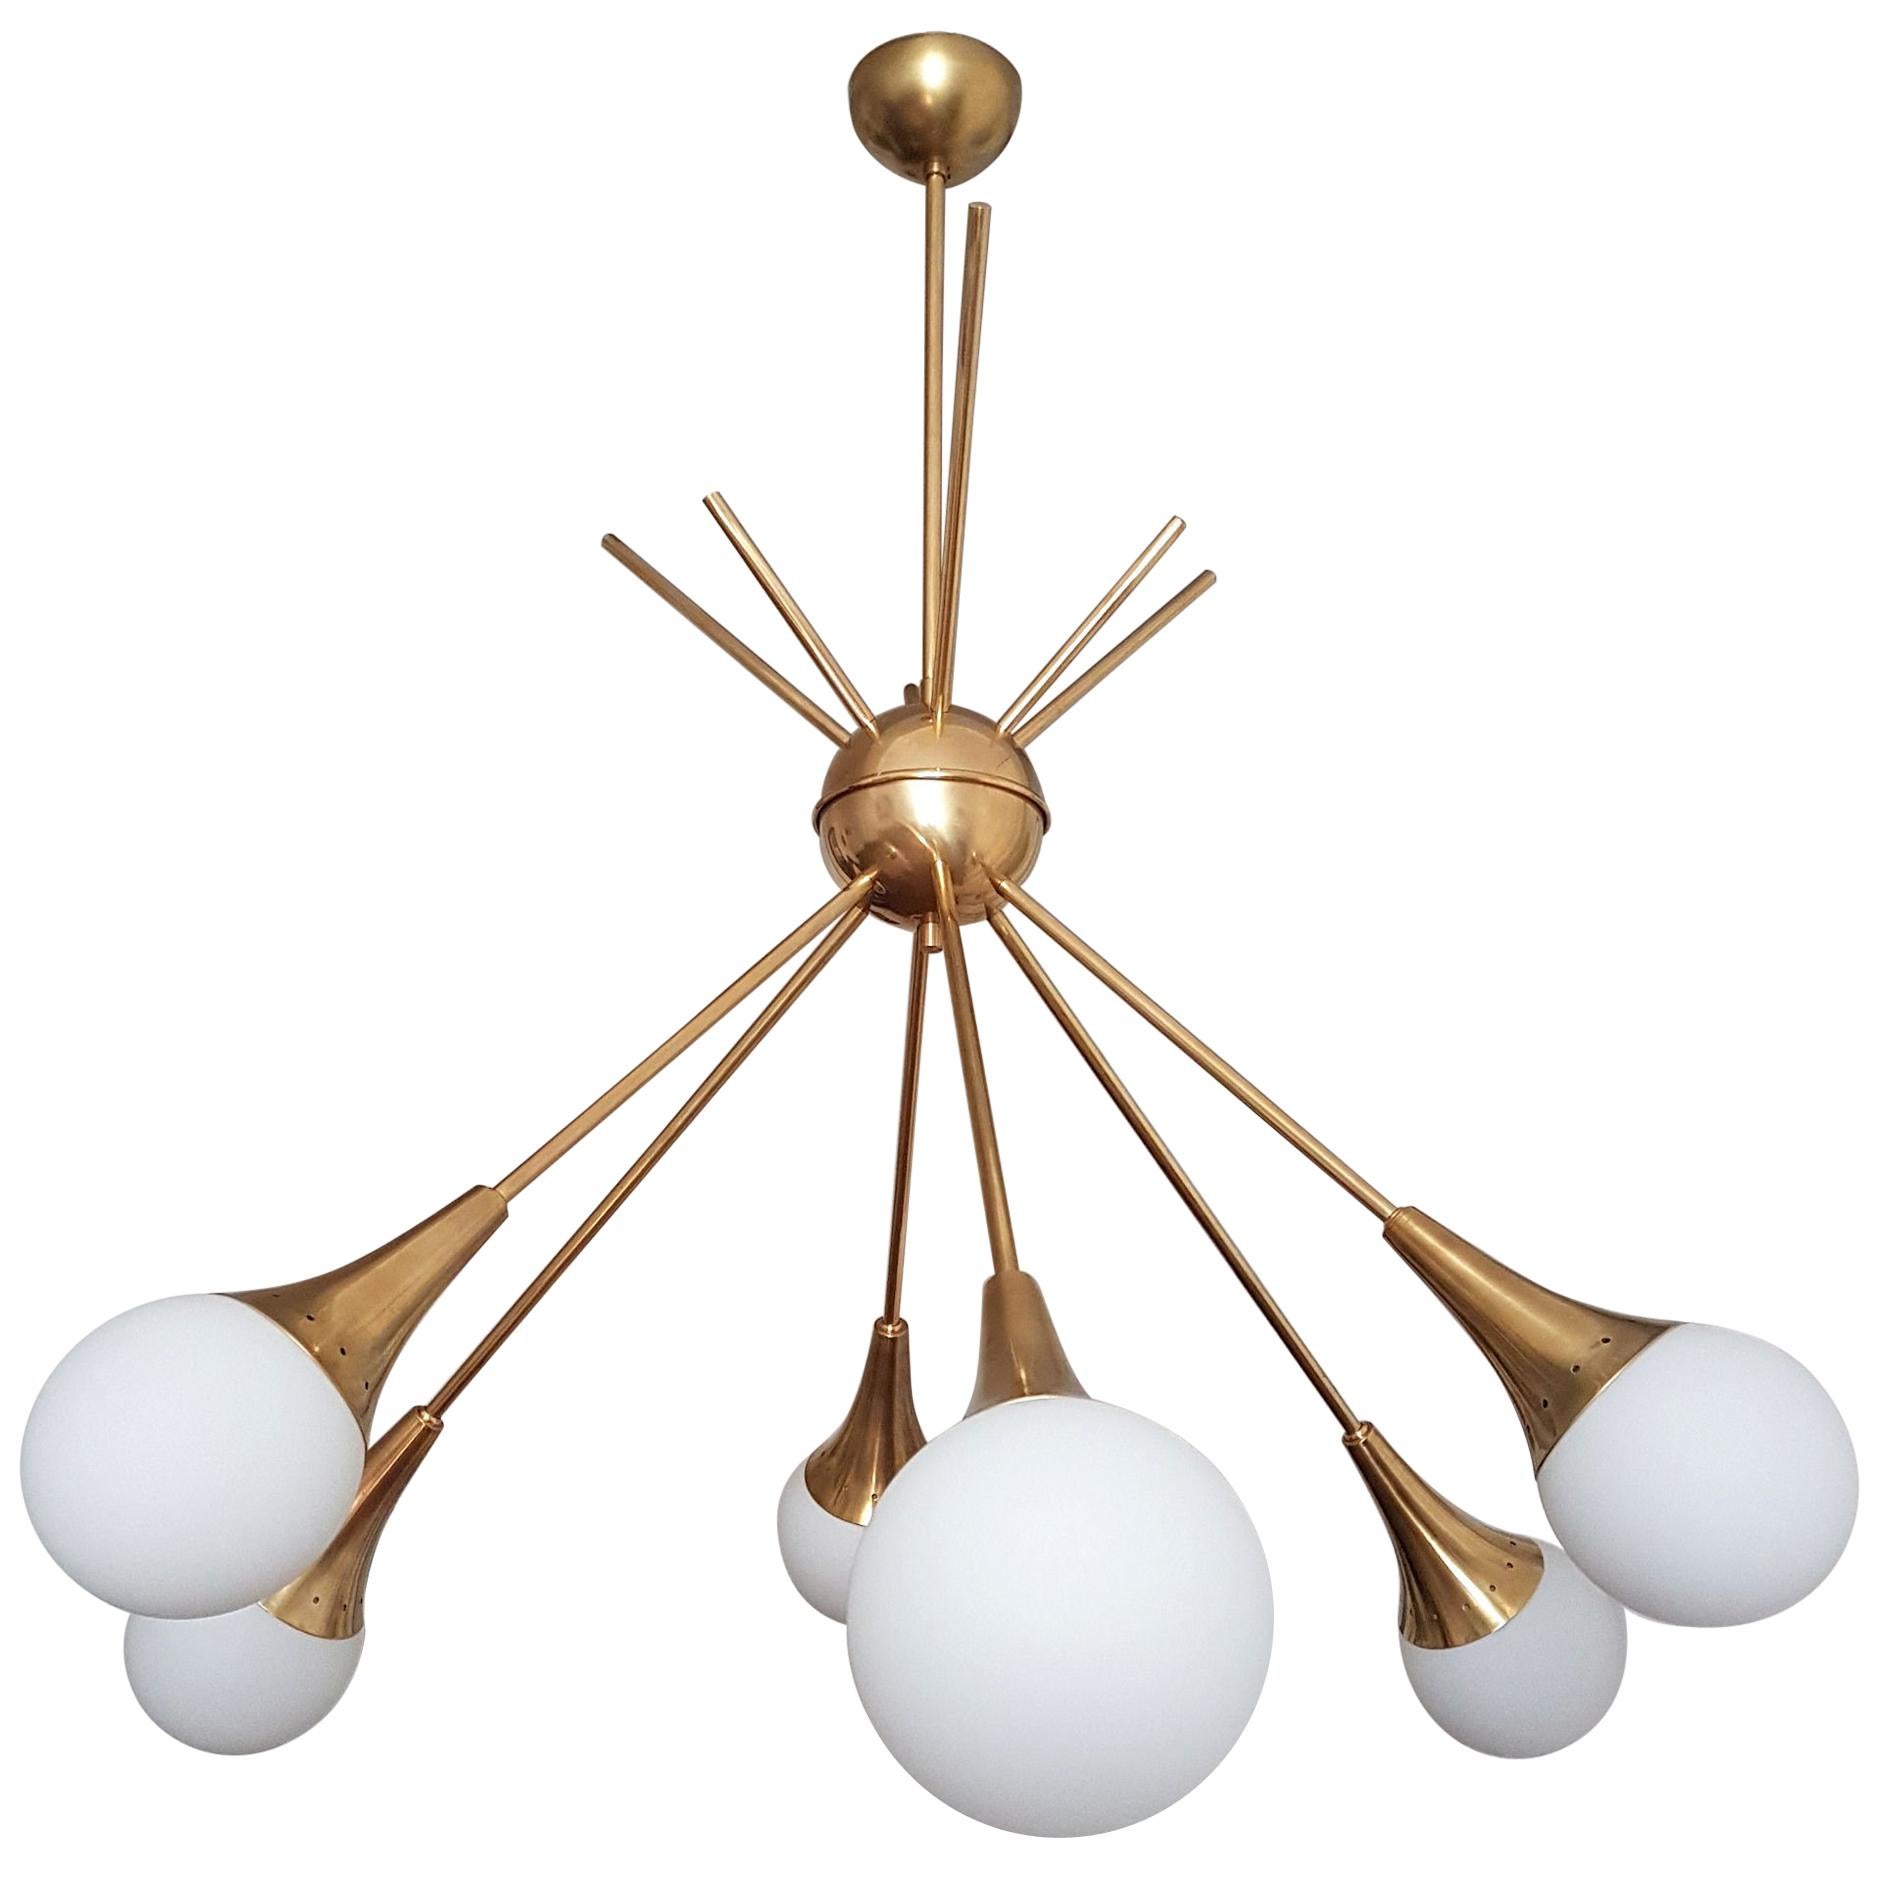 Two large Mid-Century Modern brass and white glass globes Sputnik chandeliers, in the style of Stilnovo.
Italy, early 1970s.
6 lights/globes each.
The pair has been rewired.
2 heights of stems alternate.
Sold and priced individually.